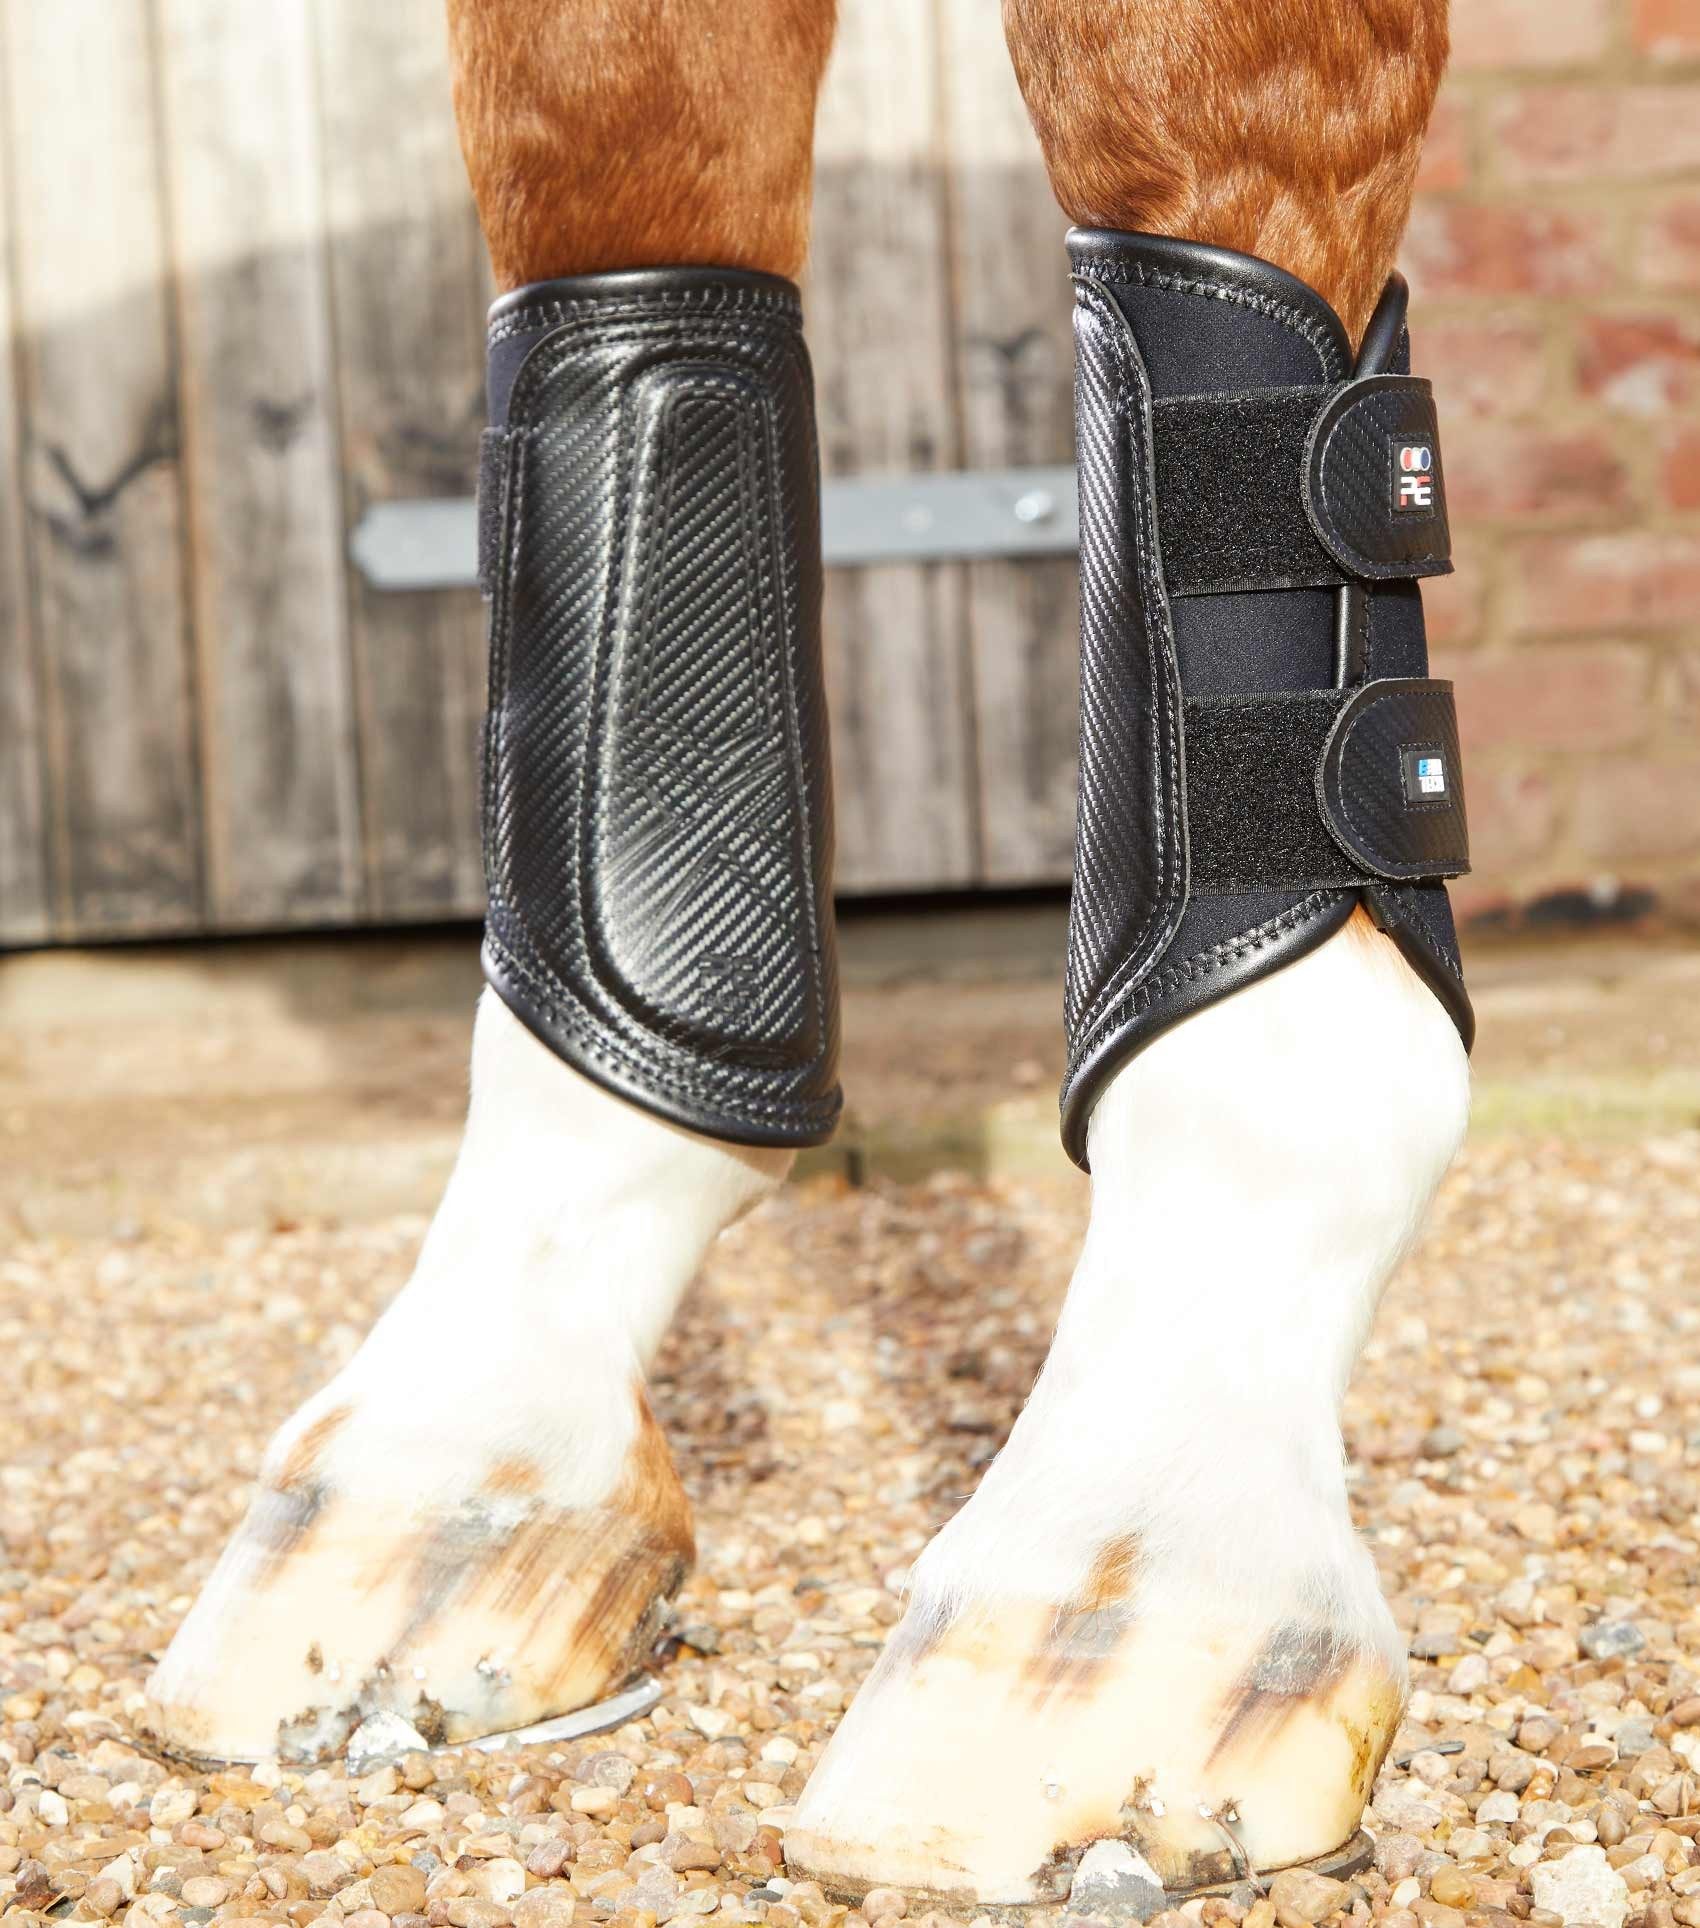 P.E CARBON AIR-TECH DOUBLE LOCKING BRUSHING BOOTS